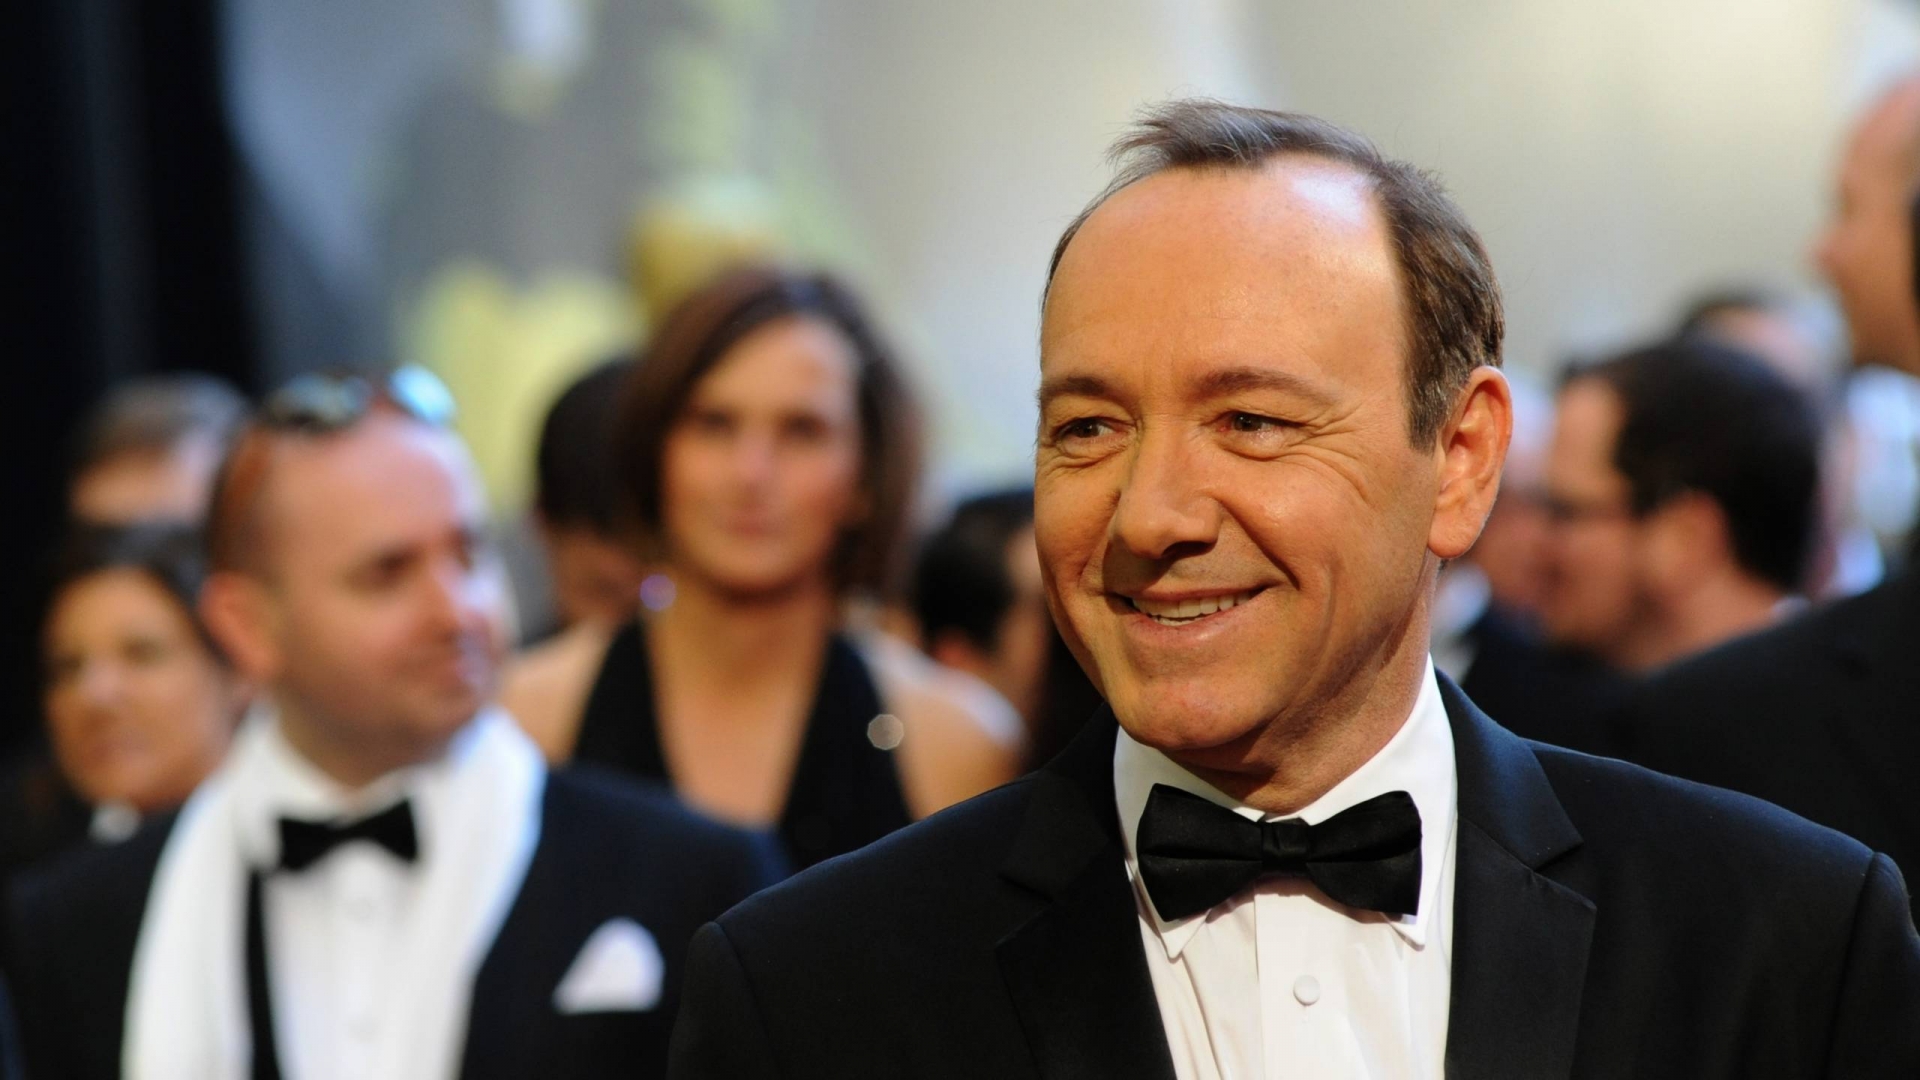 Kevin Spacey Smile for 1920 x 1080 HDTV 1080p resolution